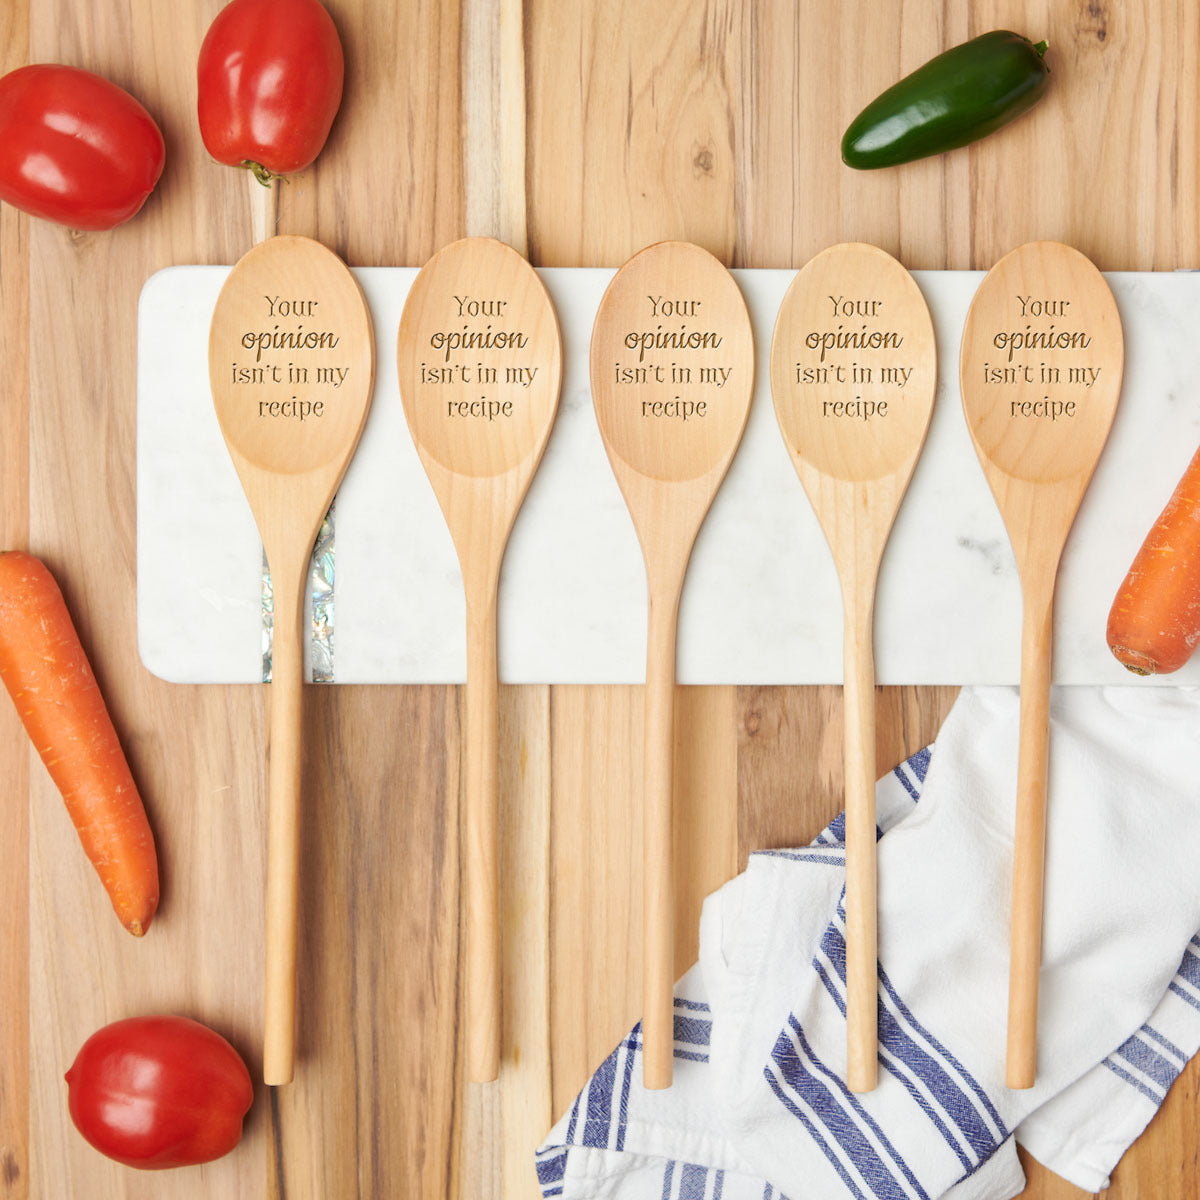 Snarky Wooden Cooking Spoons